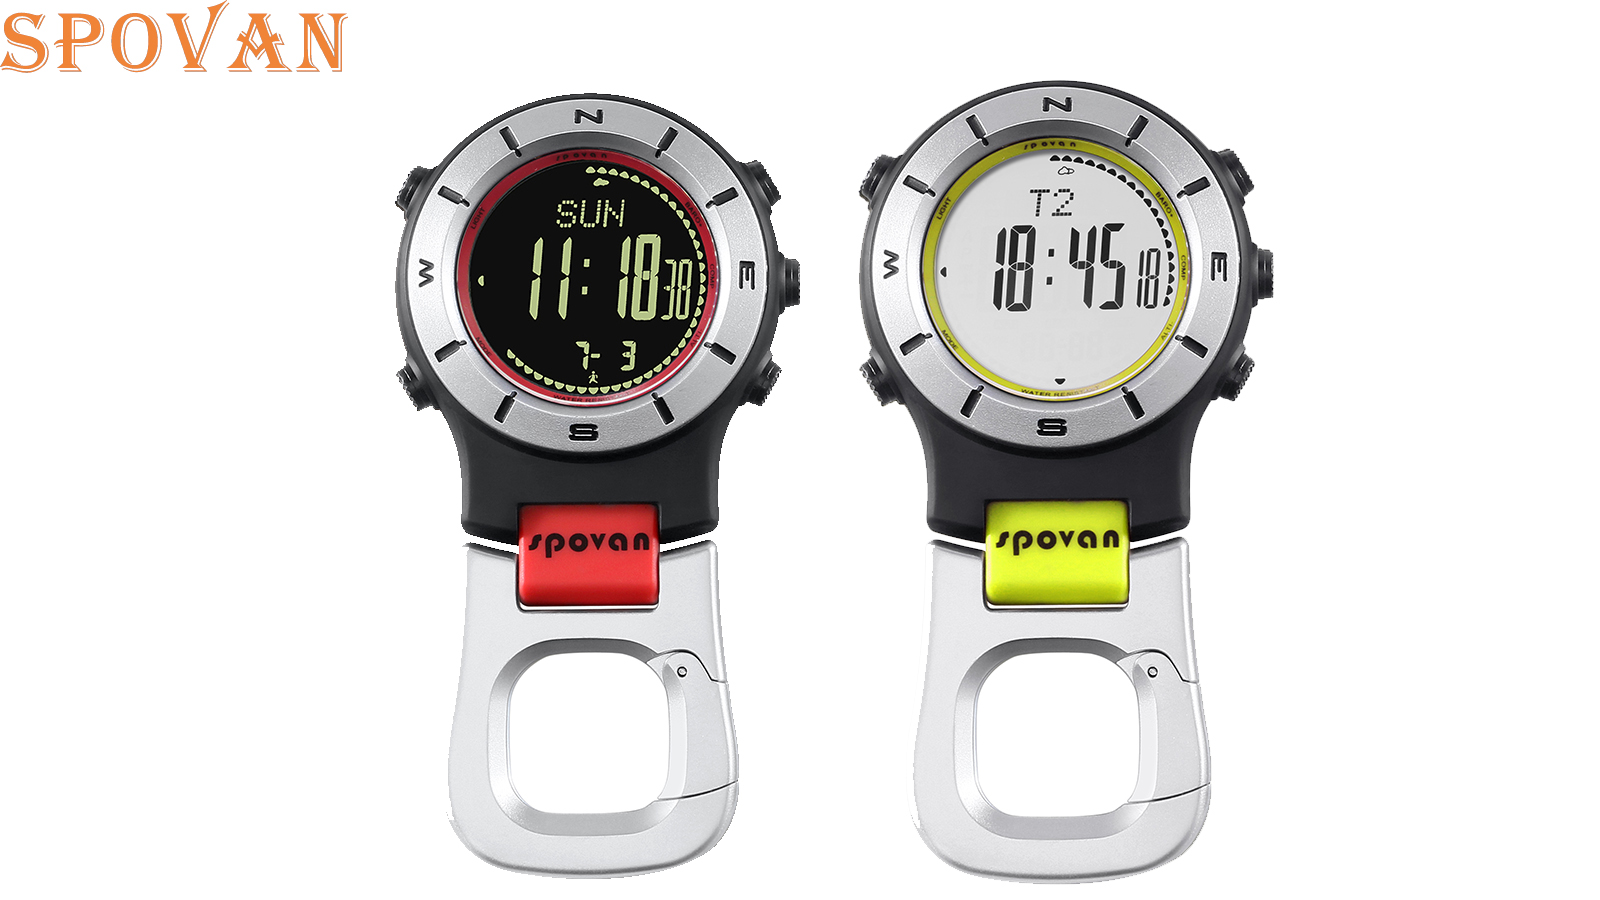 Clip-on Outdoor Watch with Compass, Altimeter, Thermometer, Barometric Spovan Elementum Ⅱ, Wholesale Watches